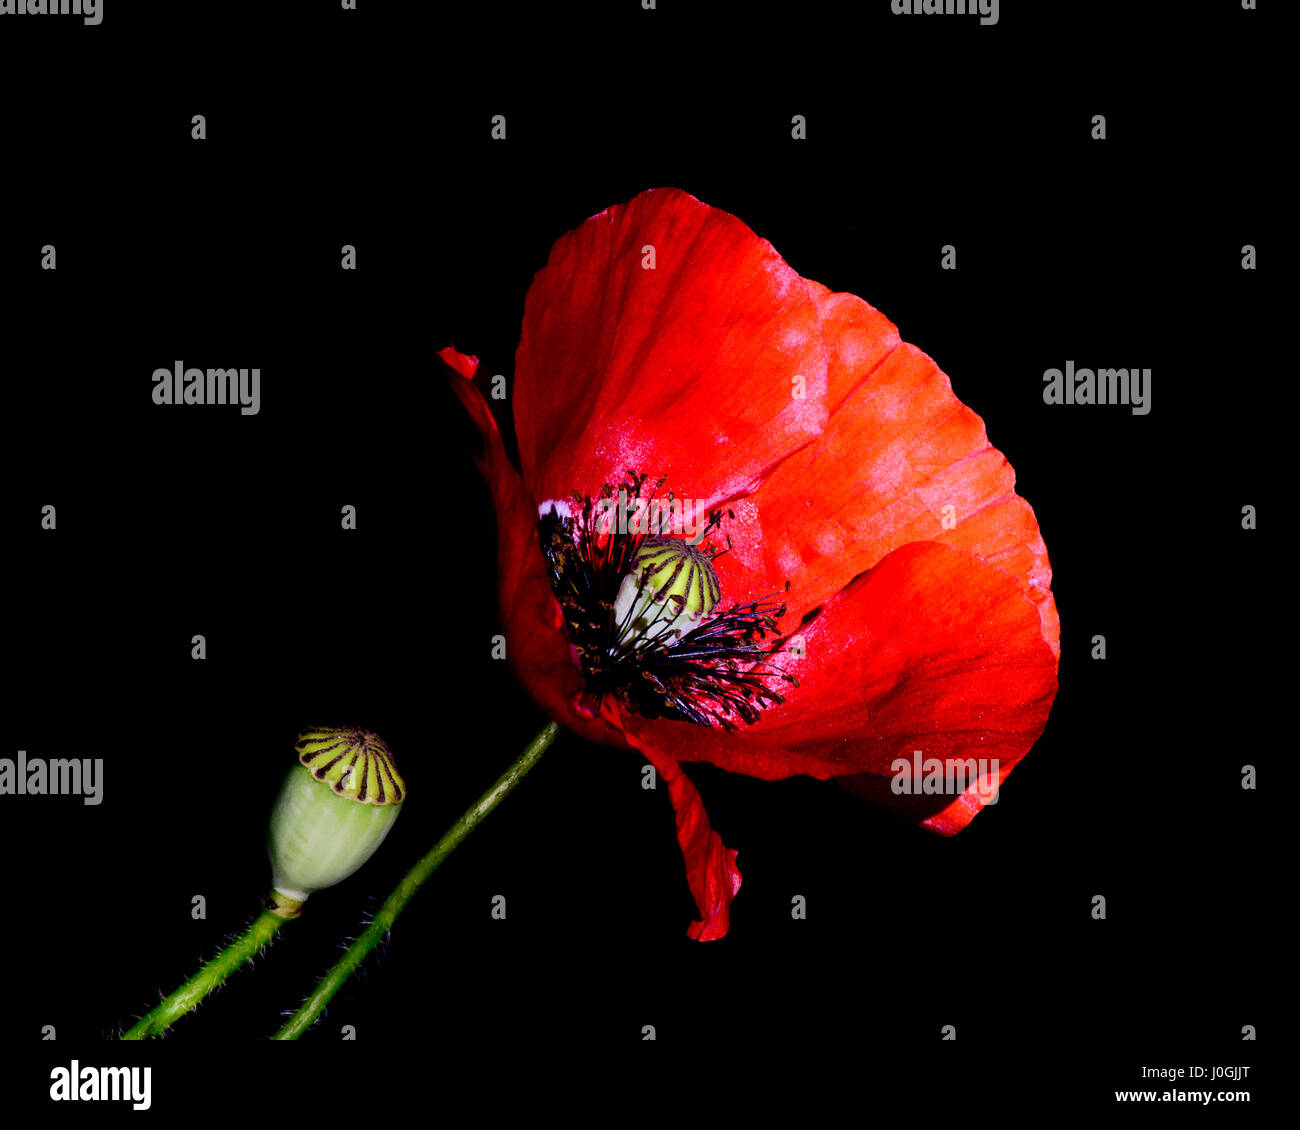 Red Poppy (Papaver rhoeas) close-up against a black background with seed pod. Stock Photo